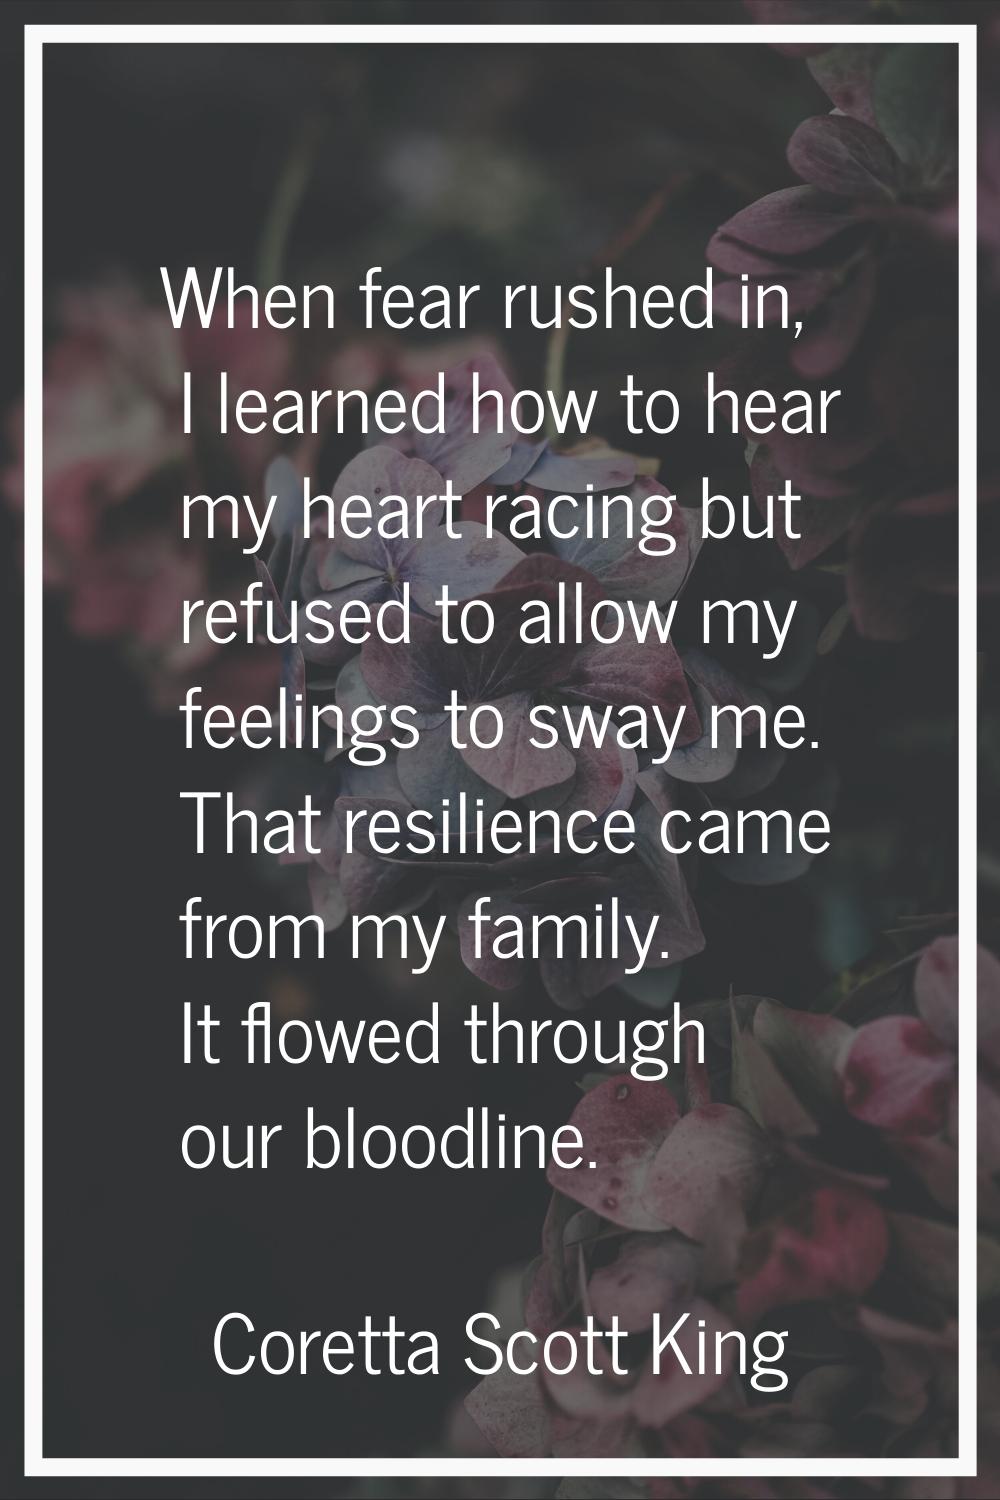 When fear rushed in, I learned how to hear my heart racing but refused to allow my feelings to sway